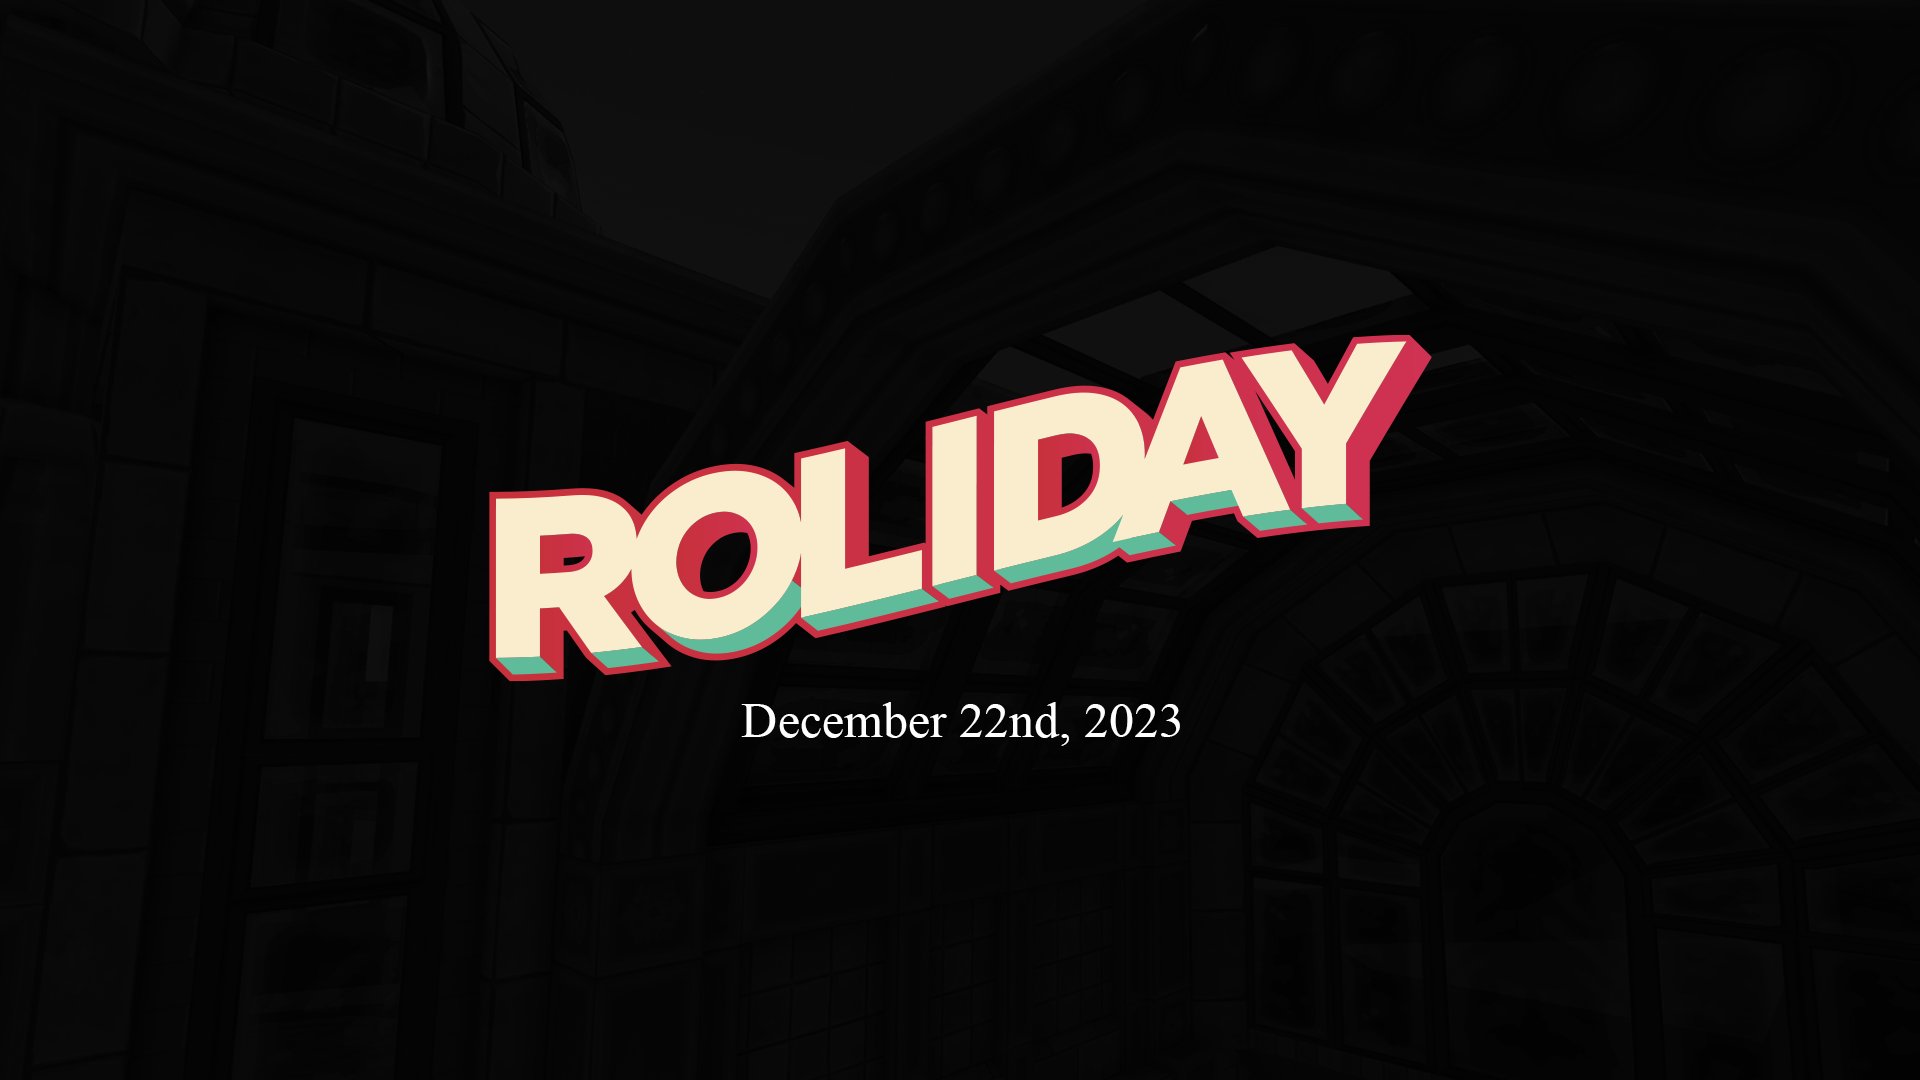 Bloxy News on X: Hey, #RobloxDev! Depending on how well your game is  performing, #Roblox may send you physical official merchandise items to  celebrate your success! Coming soon #RDC2020  / X